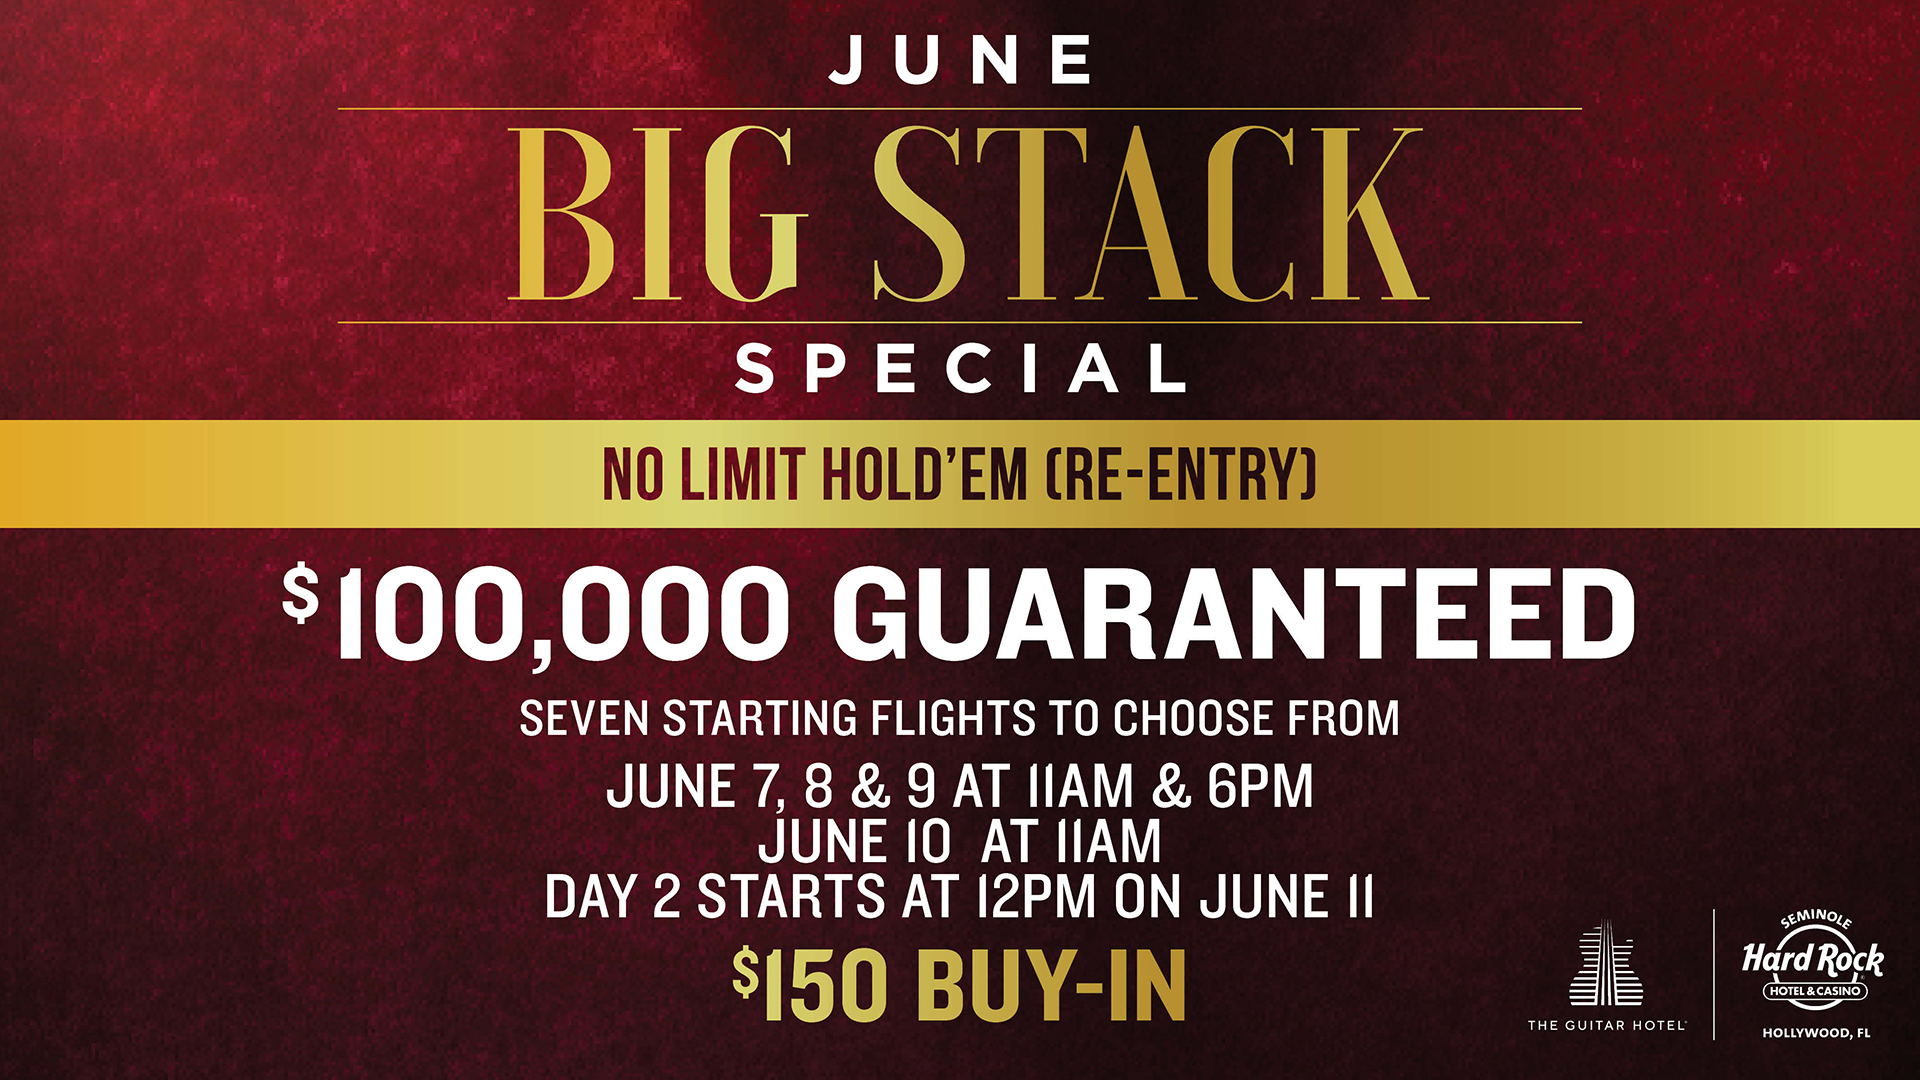 June Big Stack Special: Day 2 Chip Counts